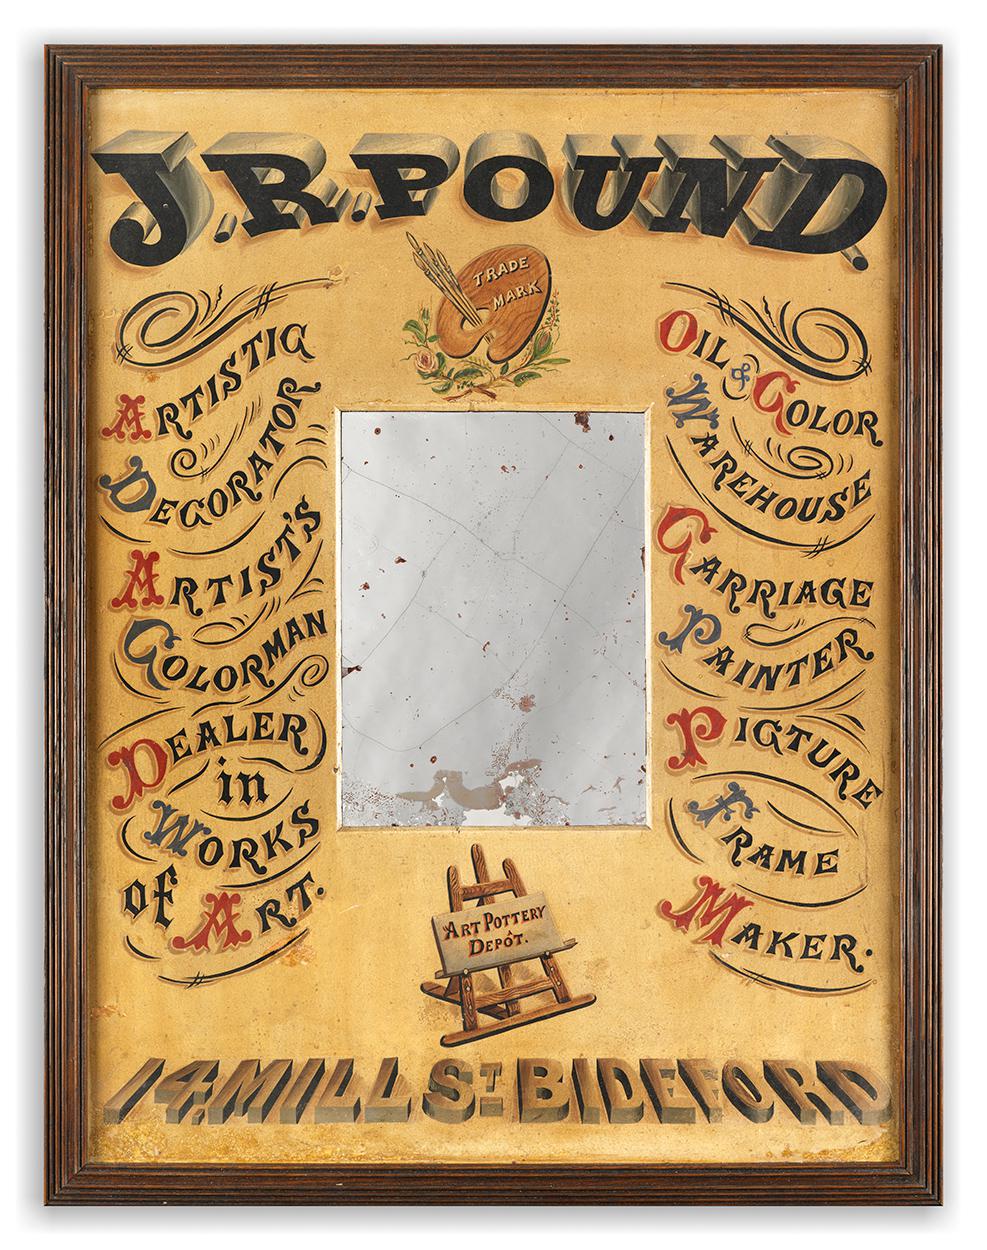 Fine Early Trade Sign for "J. R. Pound"